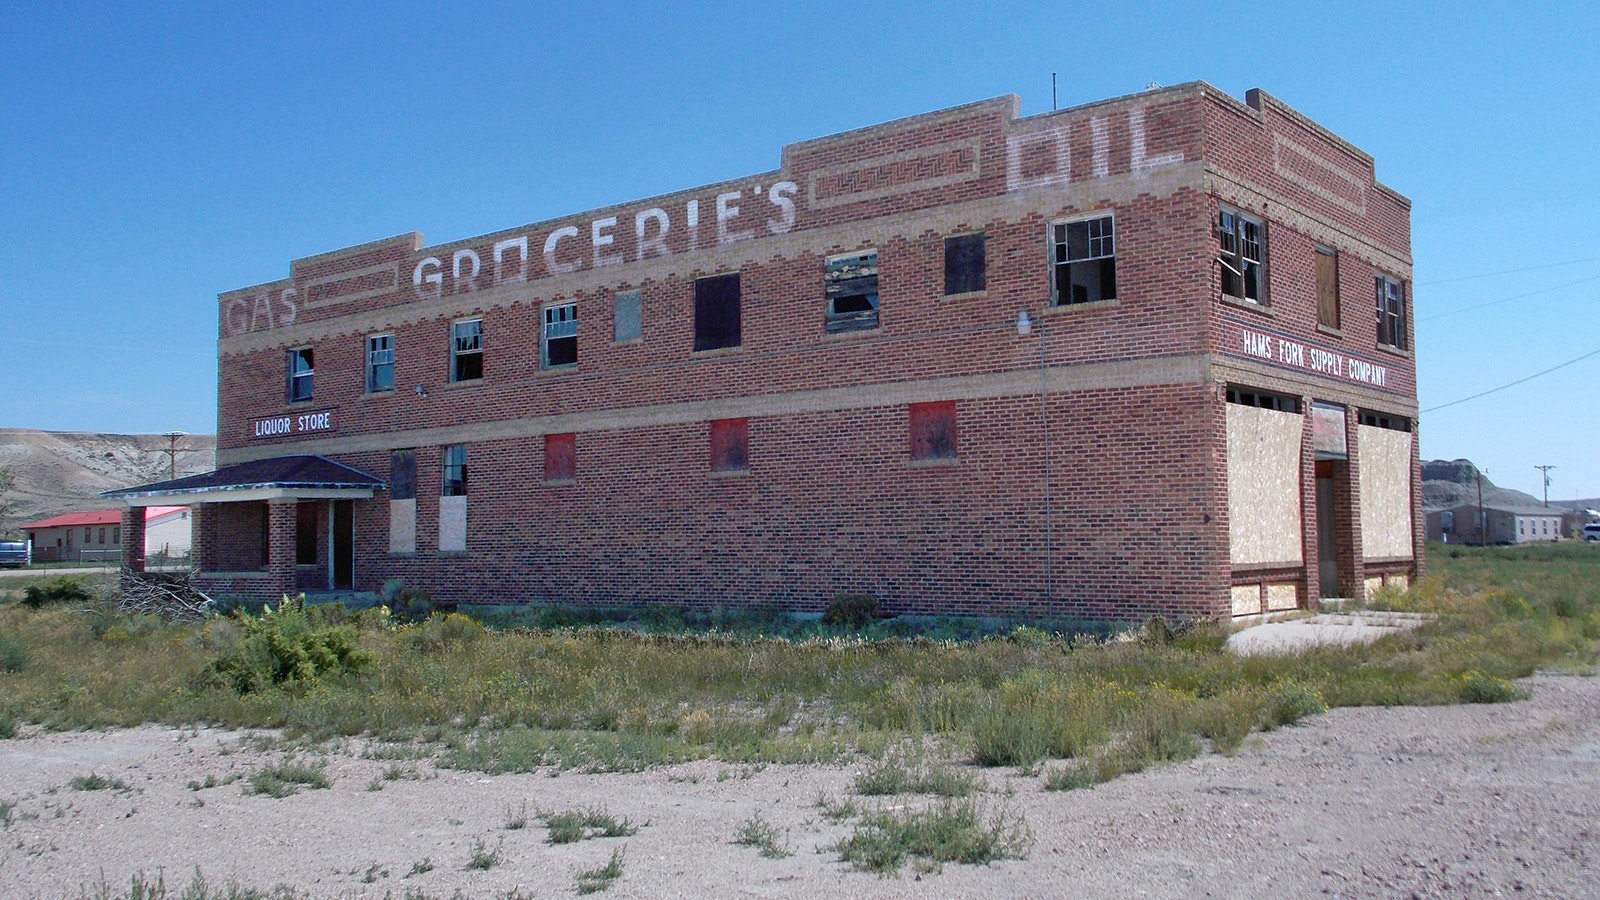 The historic brick Opal Mercantile building was vacant for 40 years and on the verge of being demolished when it was saved by a father and son who moved from California to restore the building and open an ammunition manufacturing business.